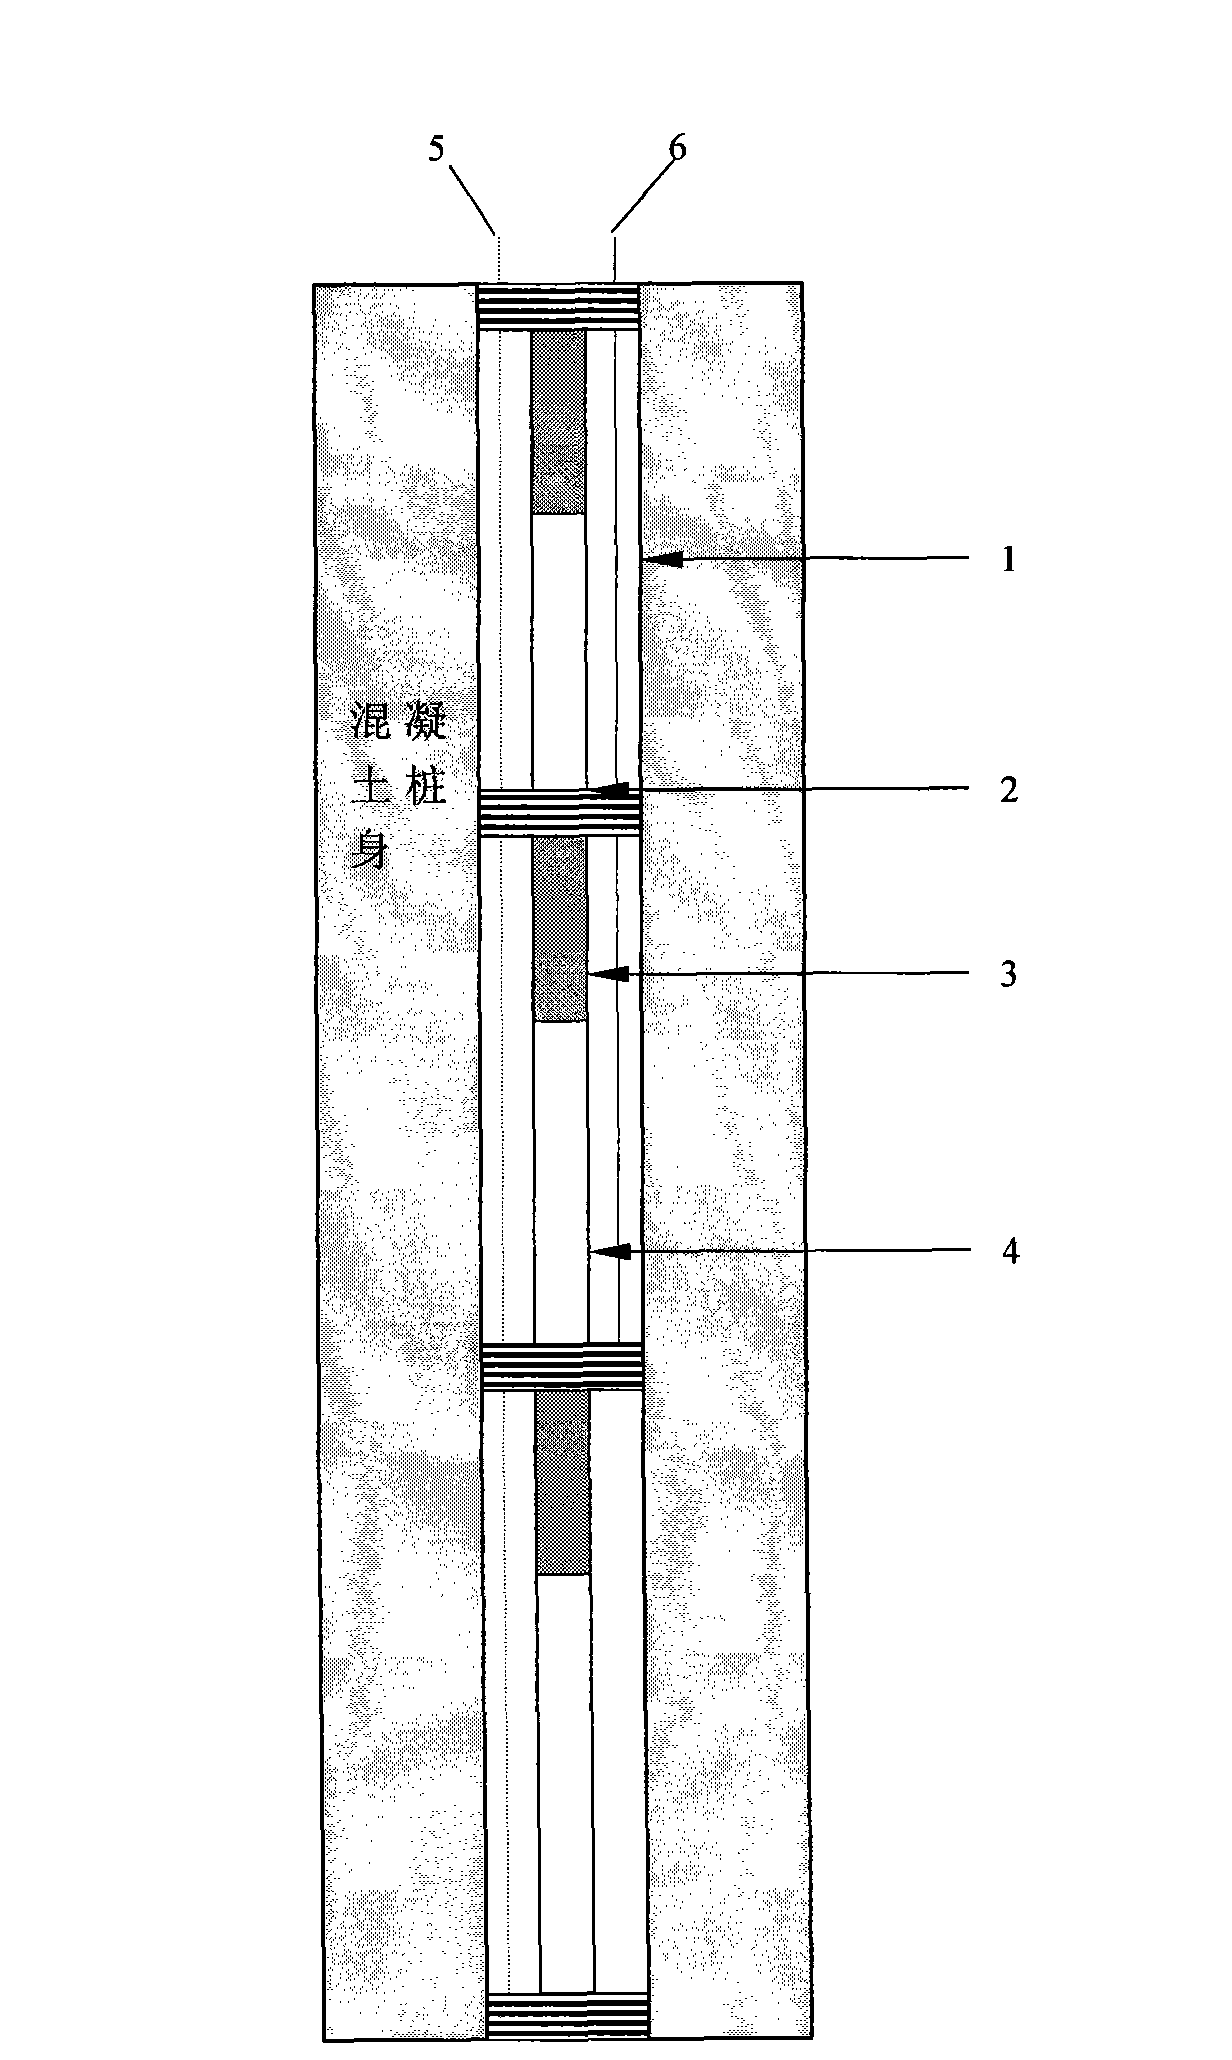 Method for measuring pile shaft internal force and cross section displacement in vertical dead-load test of foundation pile